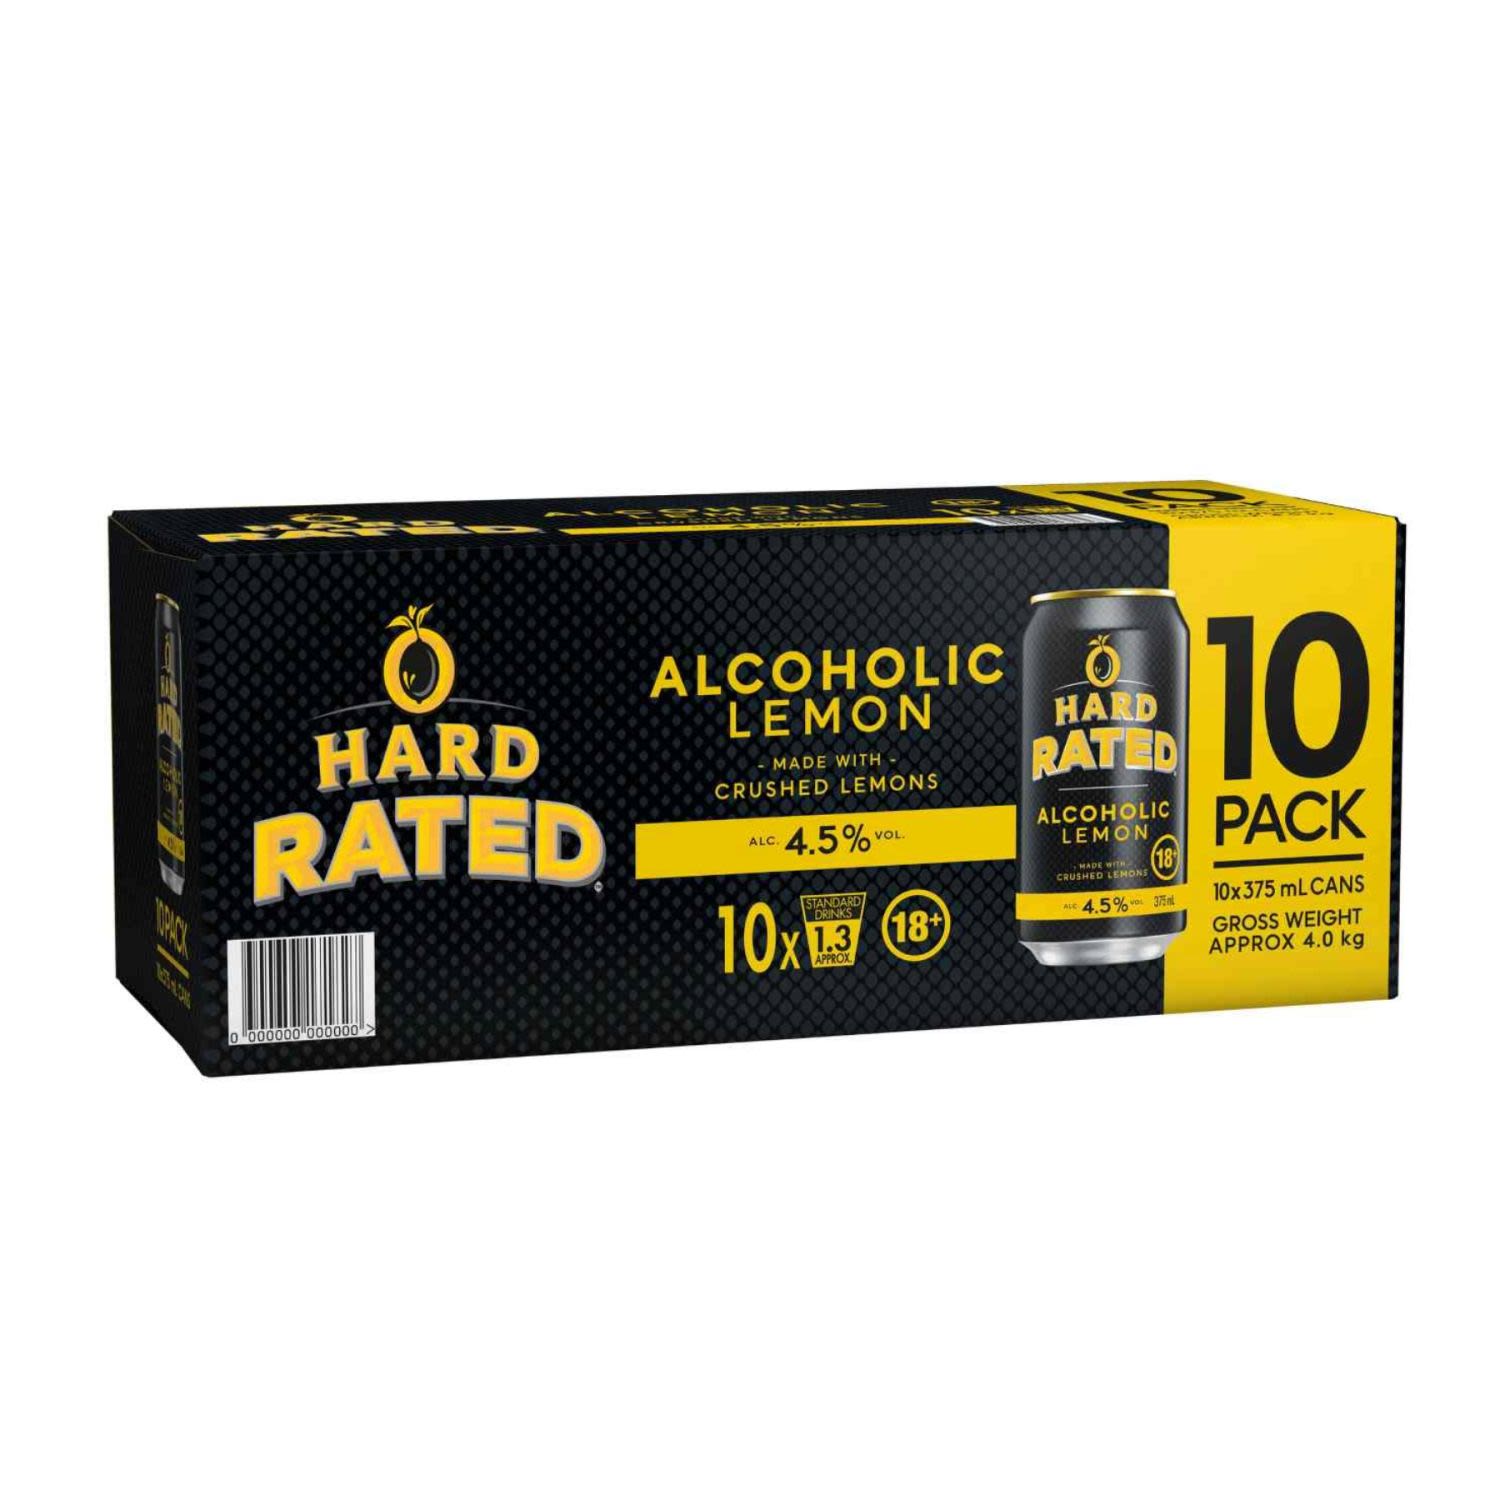 Hard Rated Alcoholic Lemon Can 375mL 10 Pack